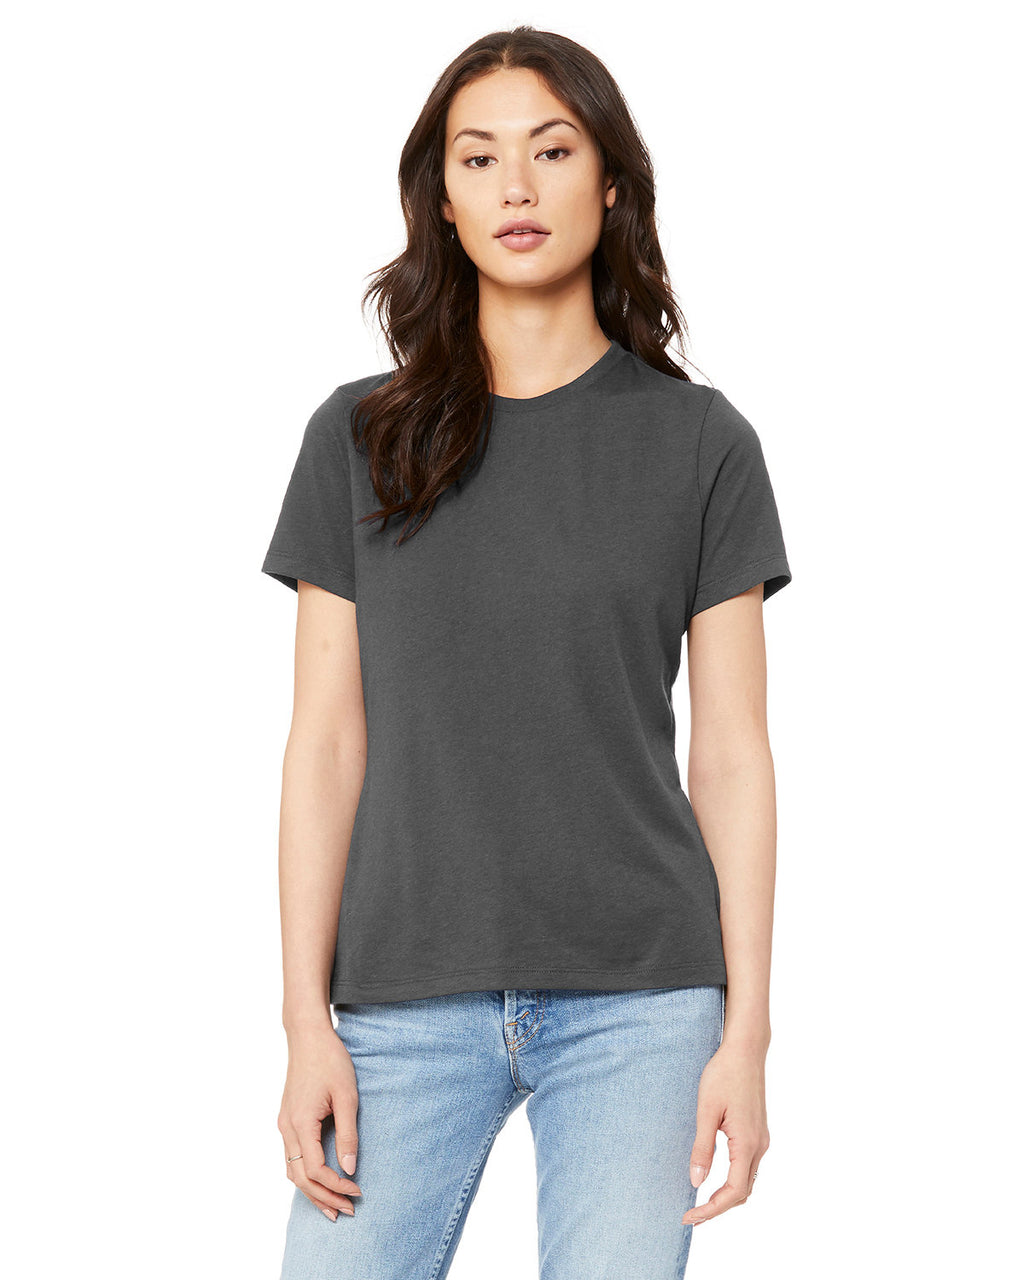 B6400-Bella + Canvas Ladies' Relaxed Jersey Short-Sleeve T-Shirt